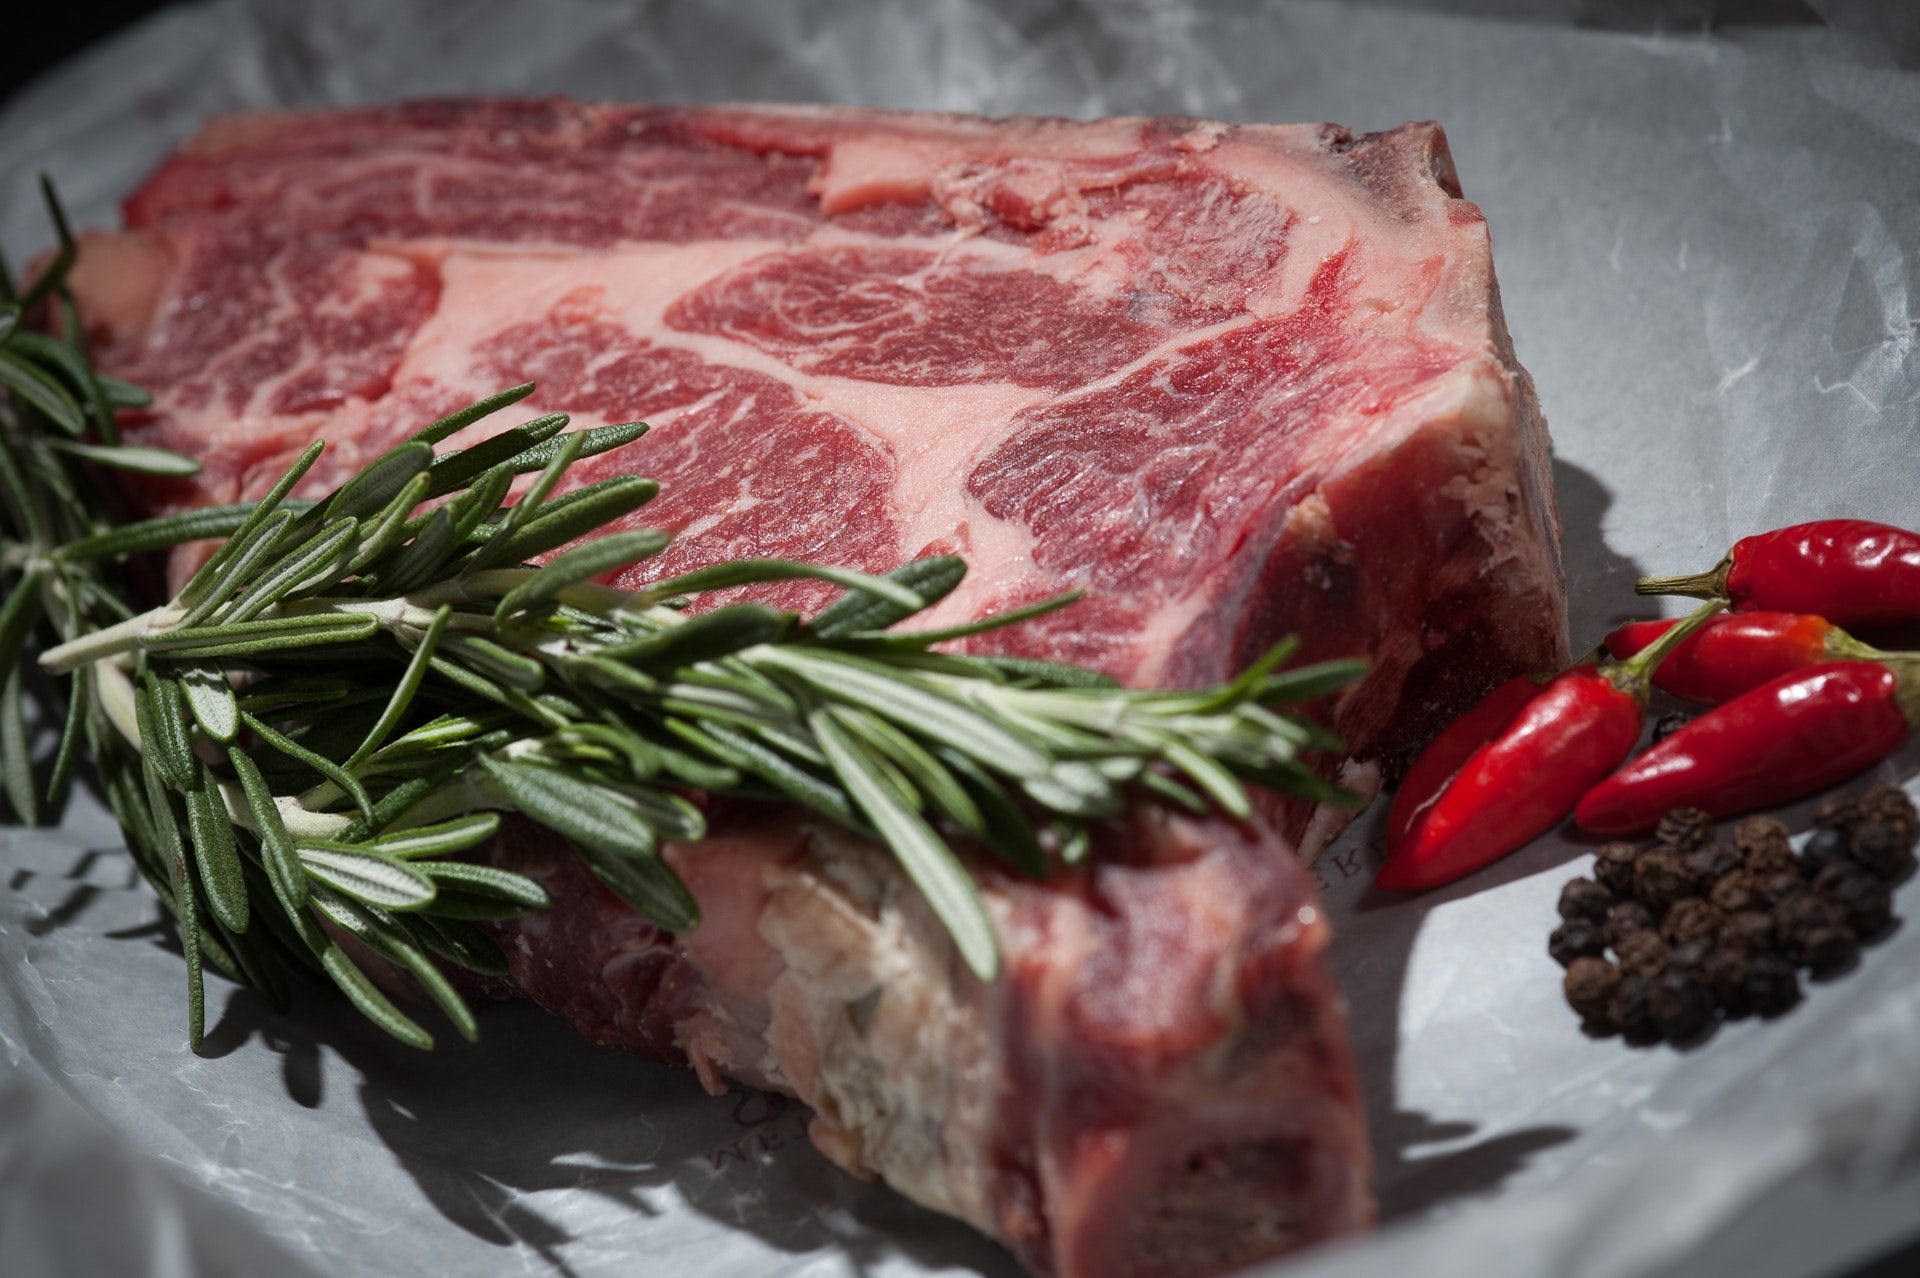 4 Secret Health Benefits to Eating Meat